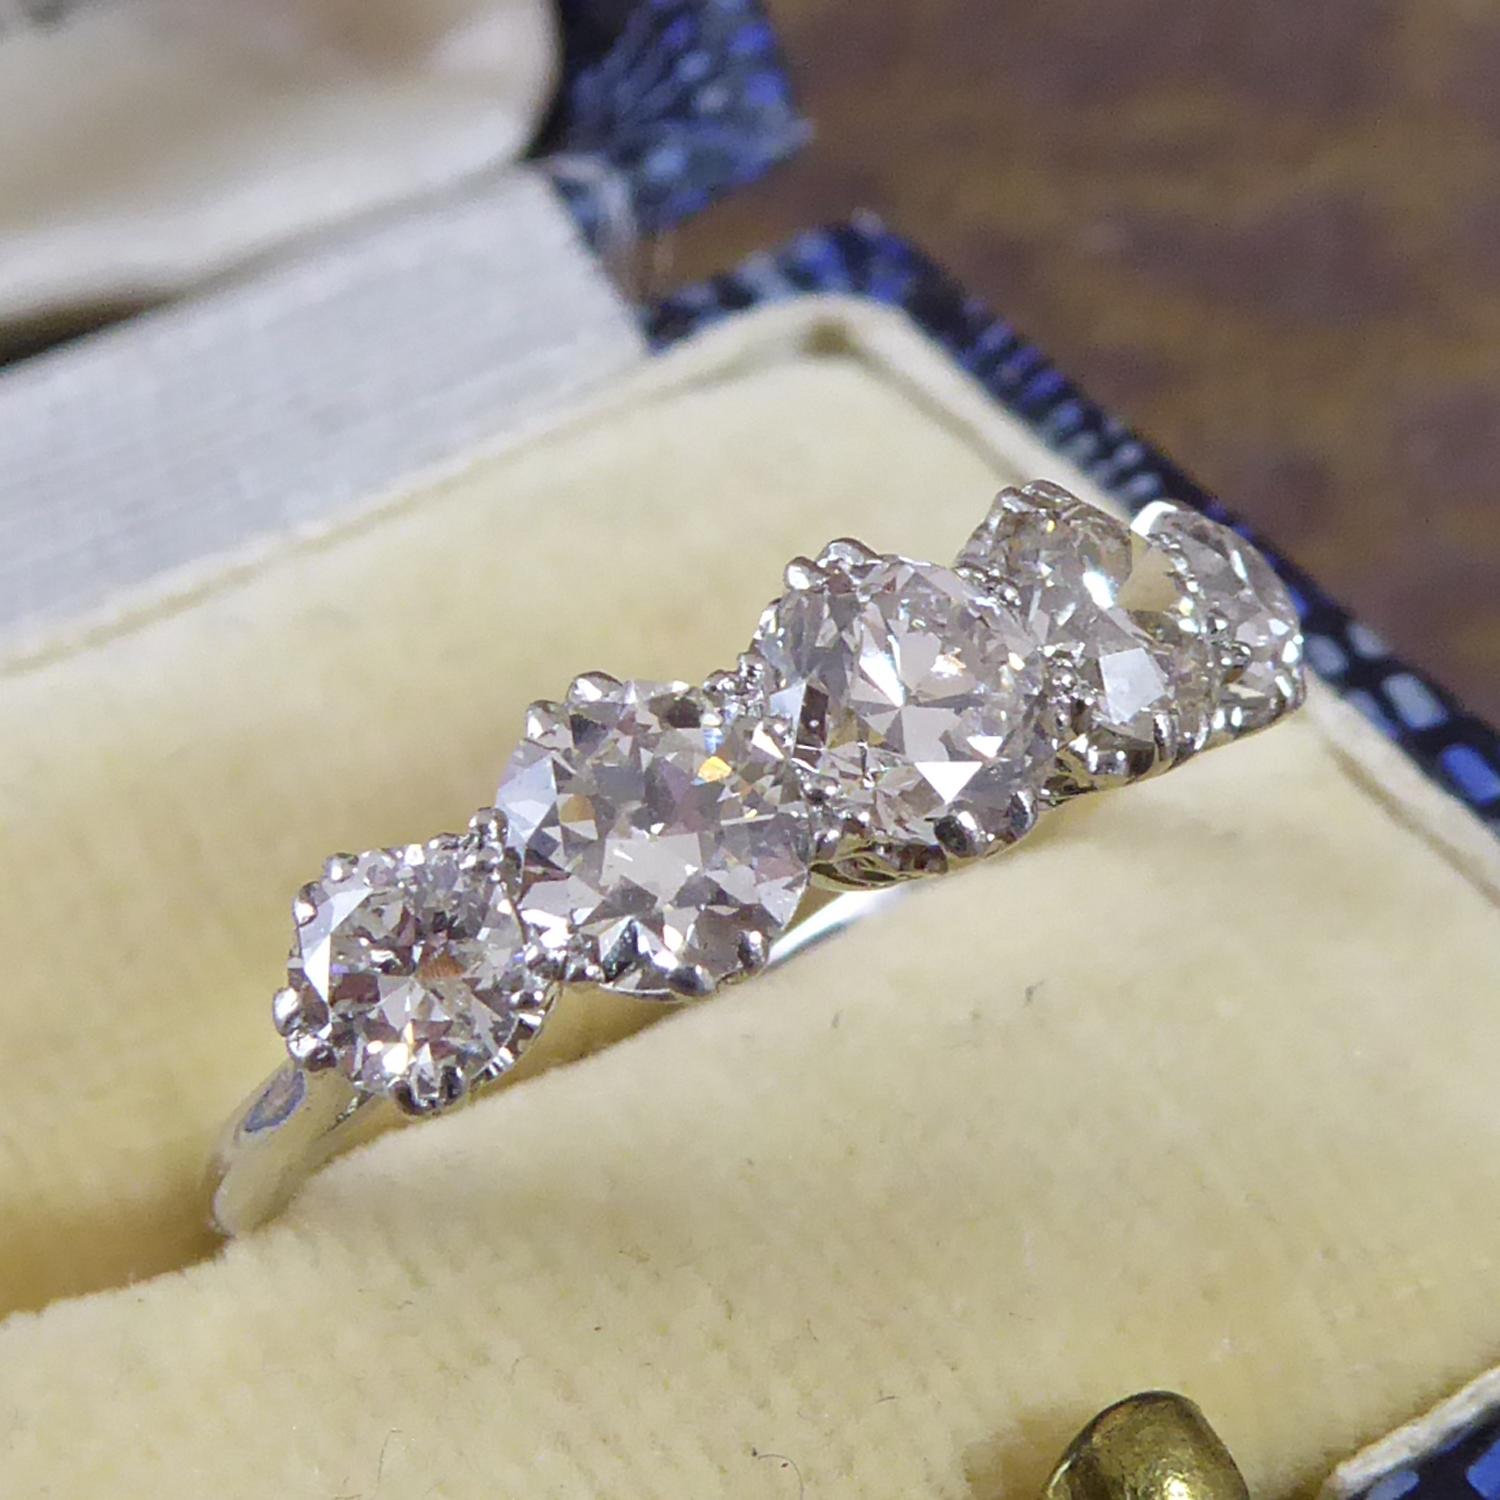 A vintage diamond five stone ring featuring early brilliant cut diamonds graduating in size from the centre diamond.  The diamond sizes, carat weight and grading (all approximate) are as follows:

1 x 0.56ct, 5.10mm x 5.10mm x 3.31mm (centre stone)